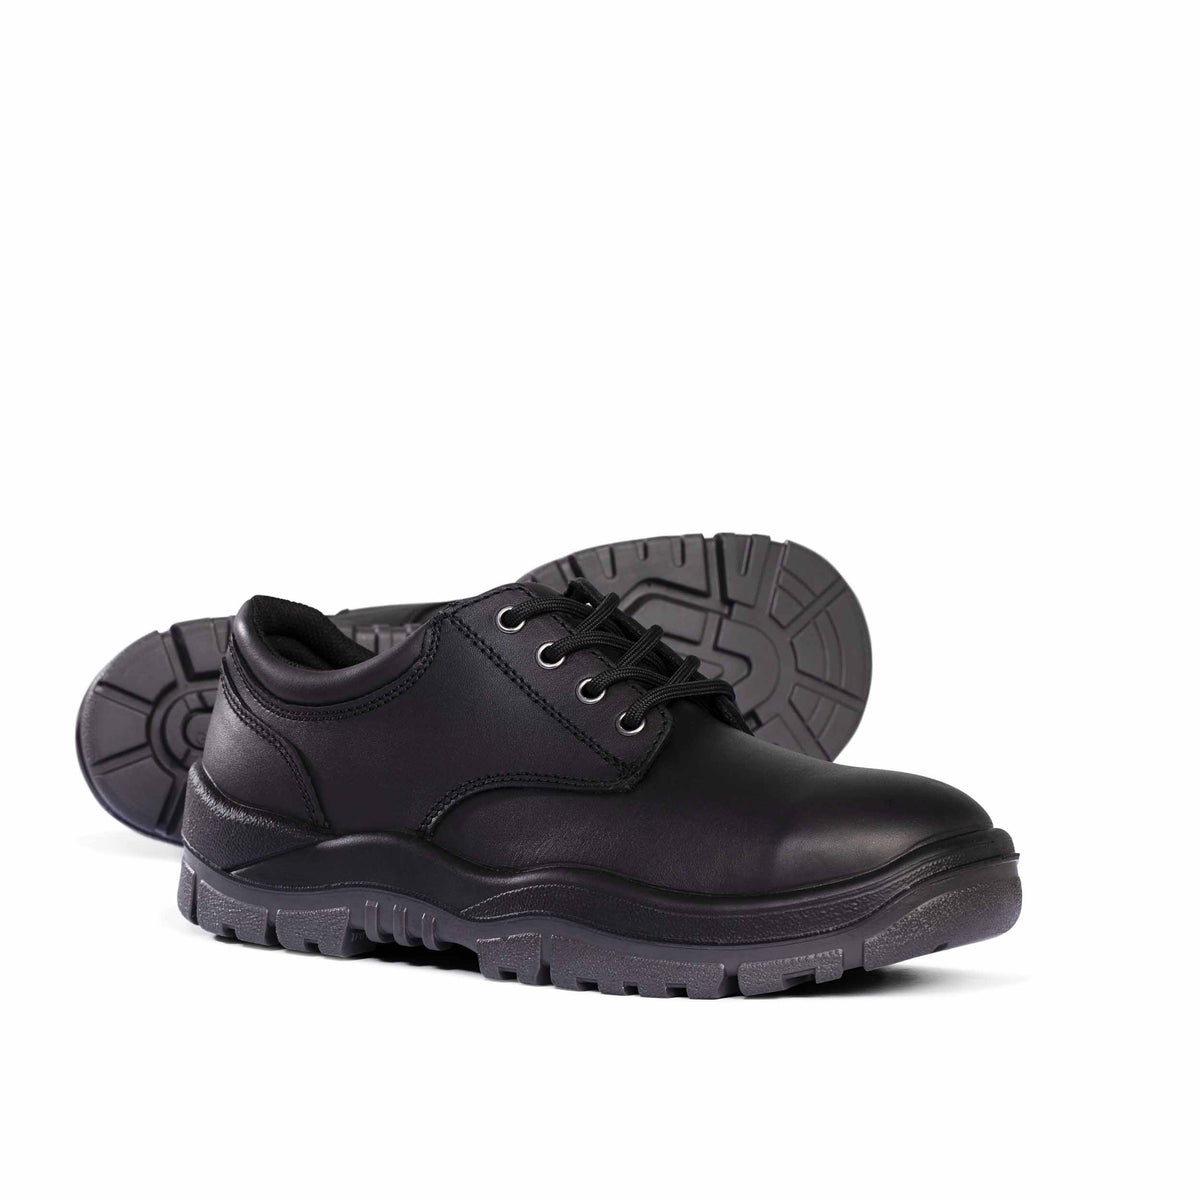 Mongrel 910025 Lace Up Work Shoes